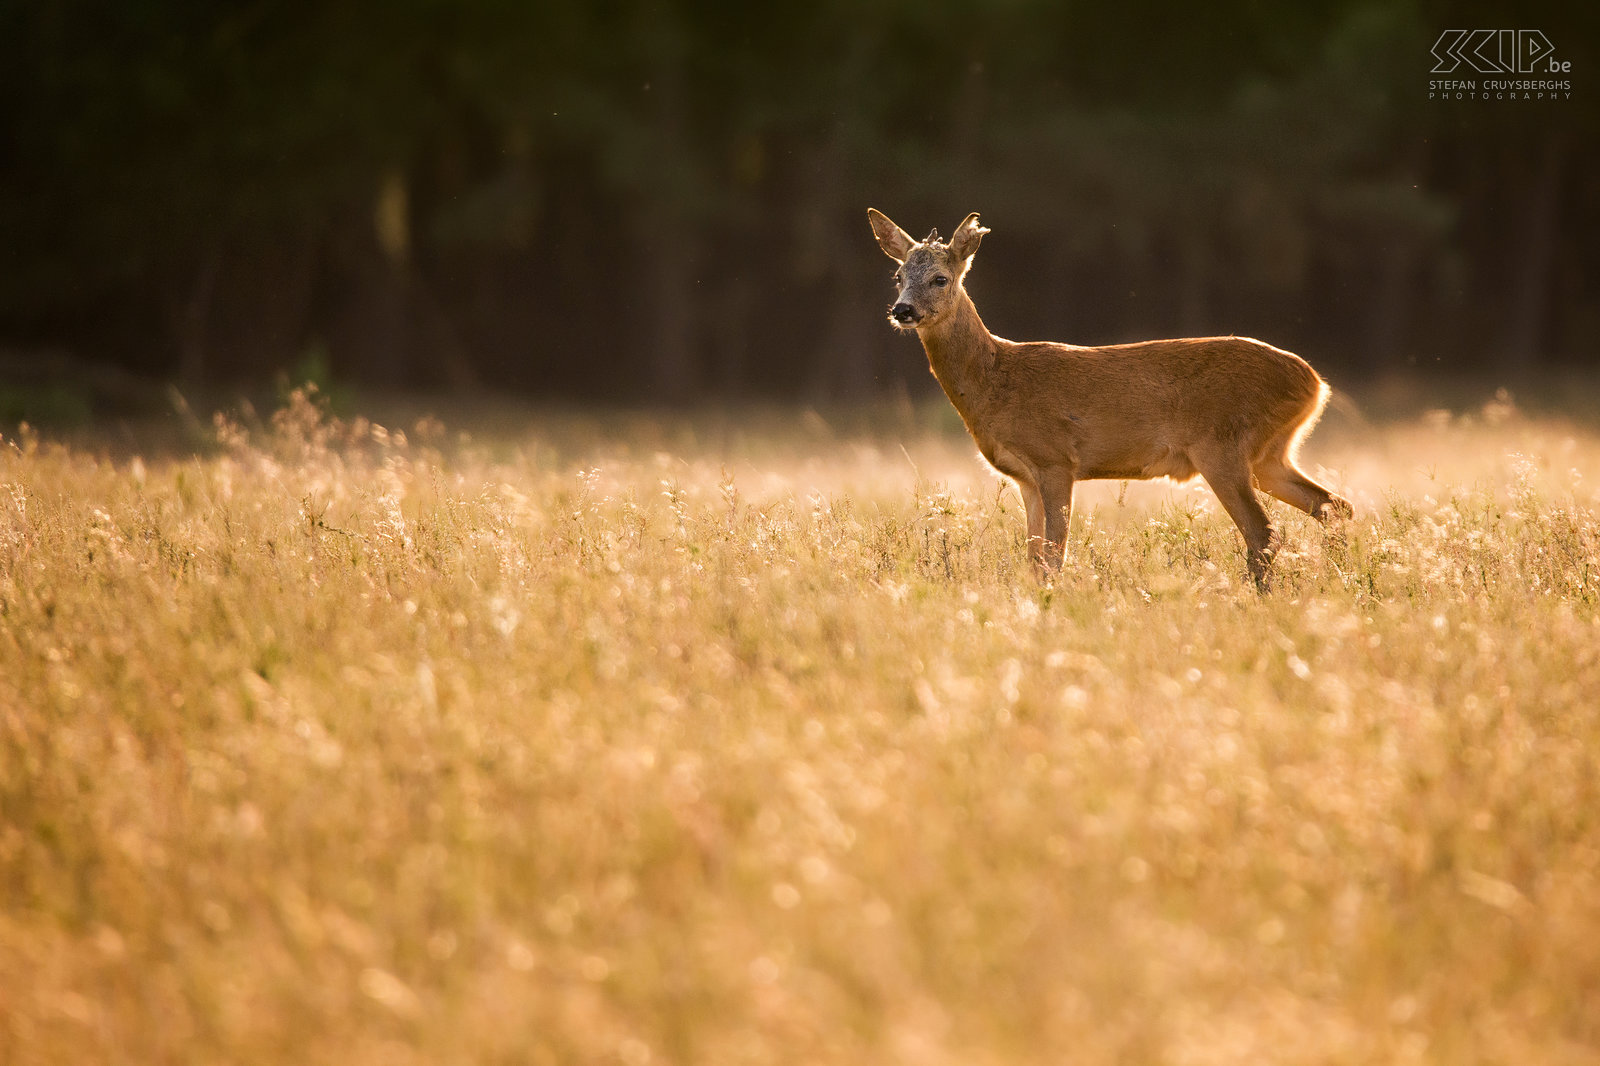 Roe deer during golden hour Roe deer in the heathland near Hilversum with wonderful golden light at the end of a bright summer day. Stefan Cruysberghs